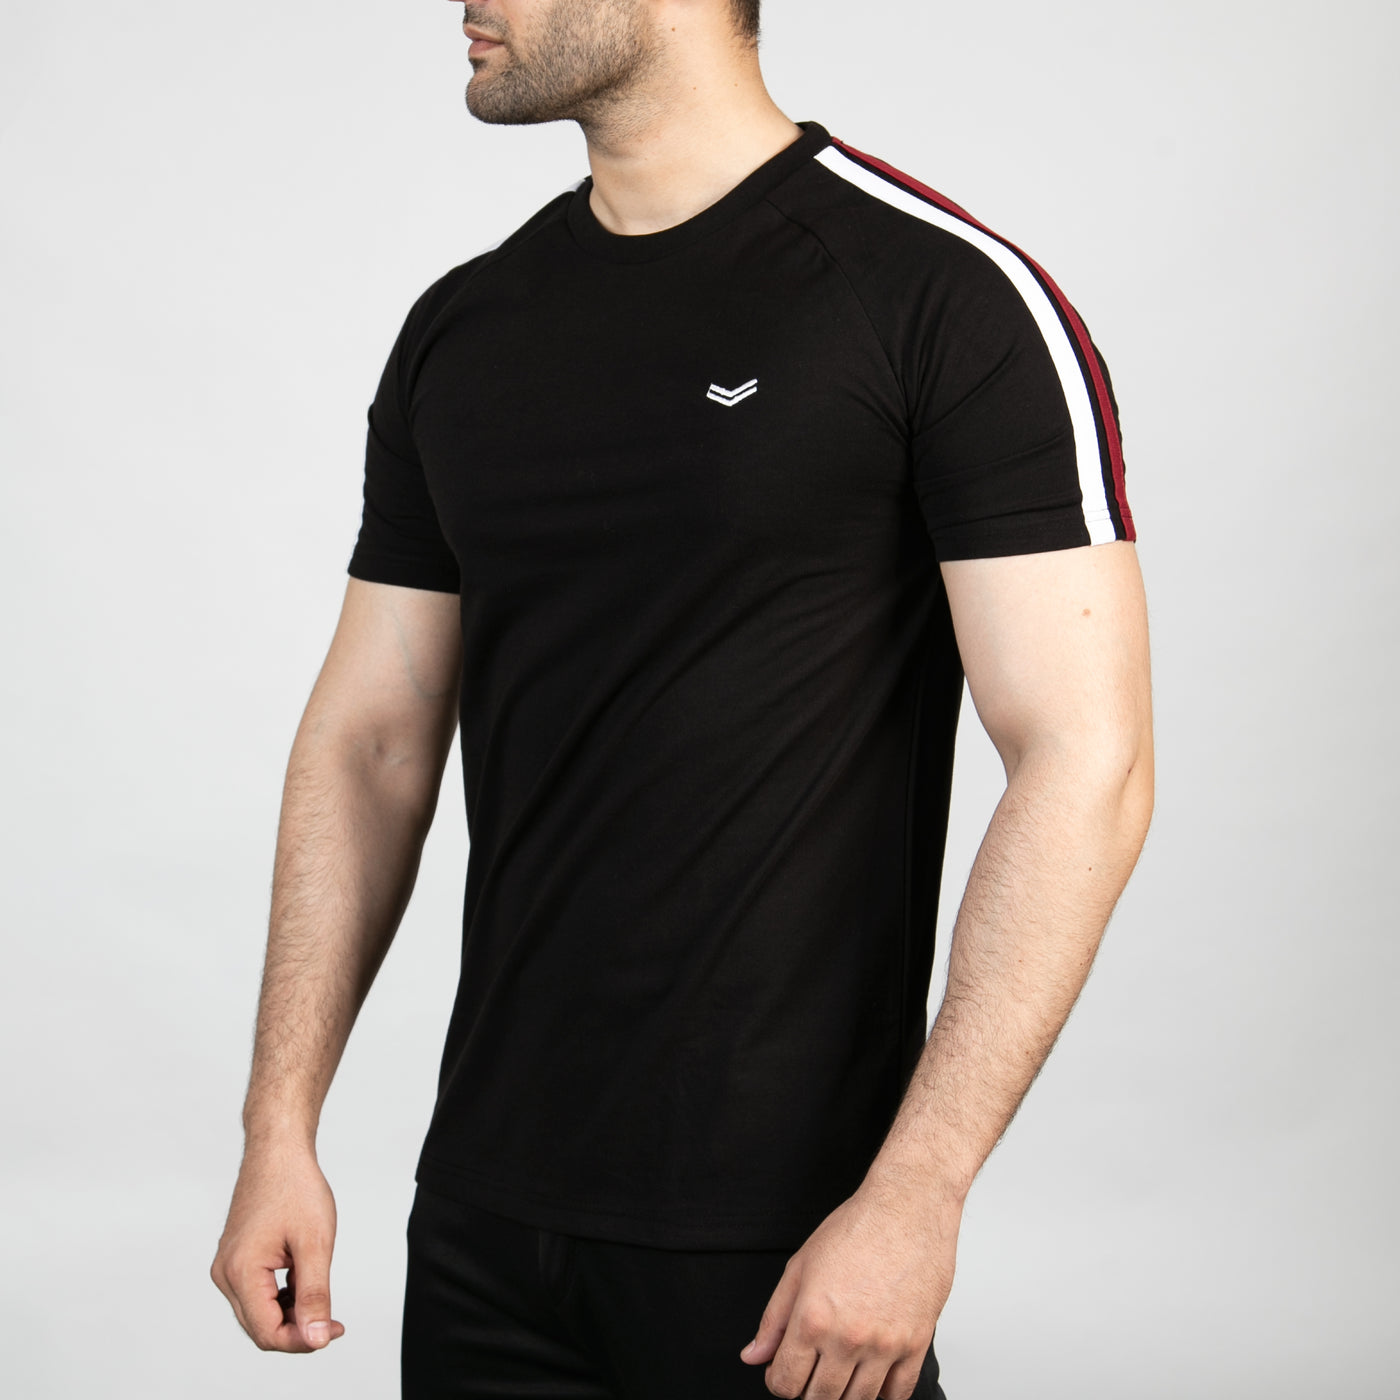 Black T-Shirt with White & Red Shoulder Stripes